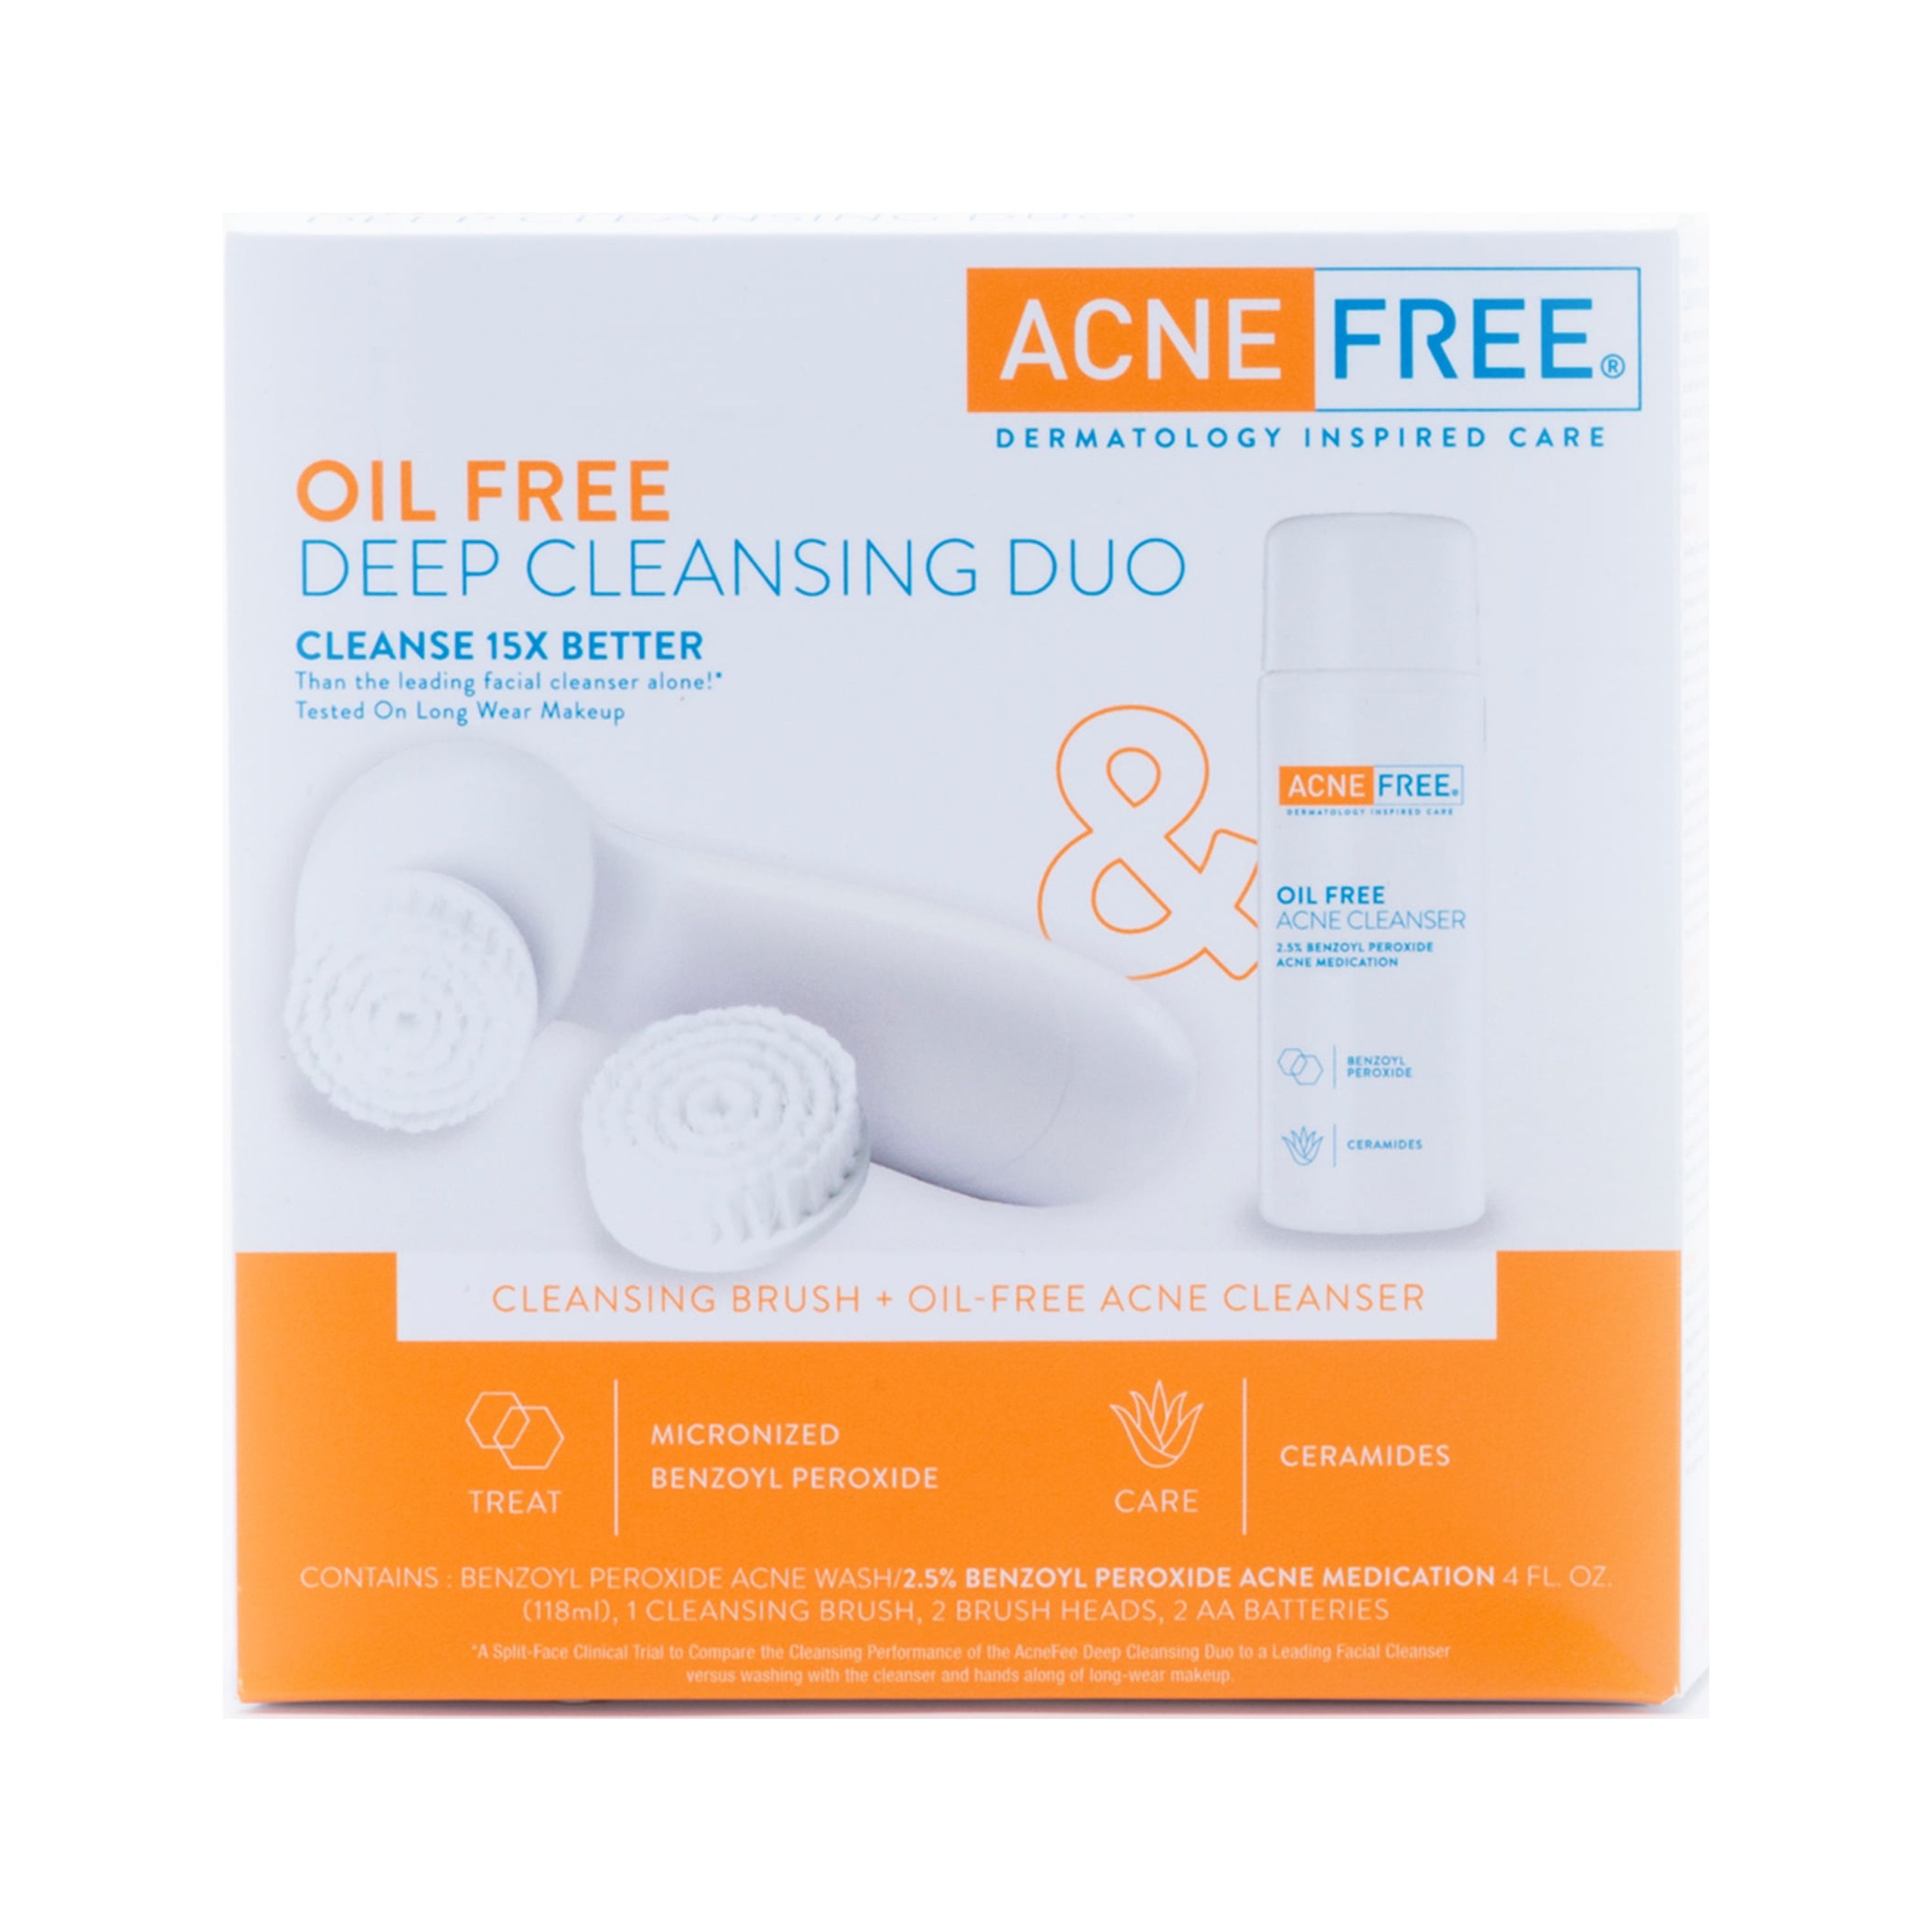 AcneFree Deep Cleansing Duo Brush & Oil-Free Acne Face Cleanser, 15X Better Clean - image 1 of 12